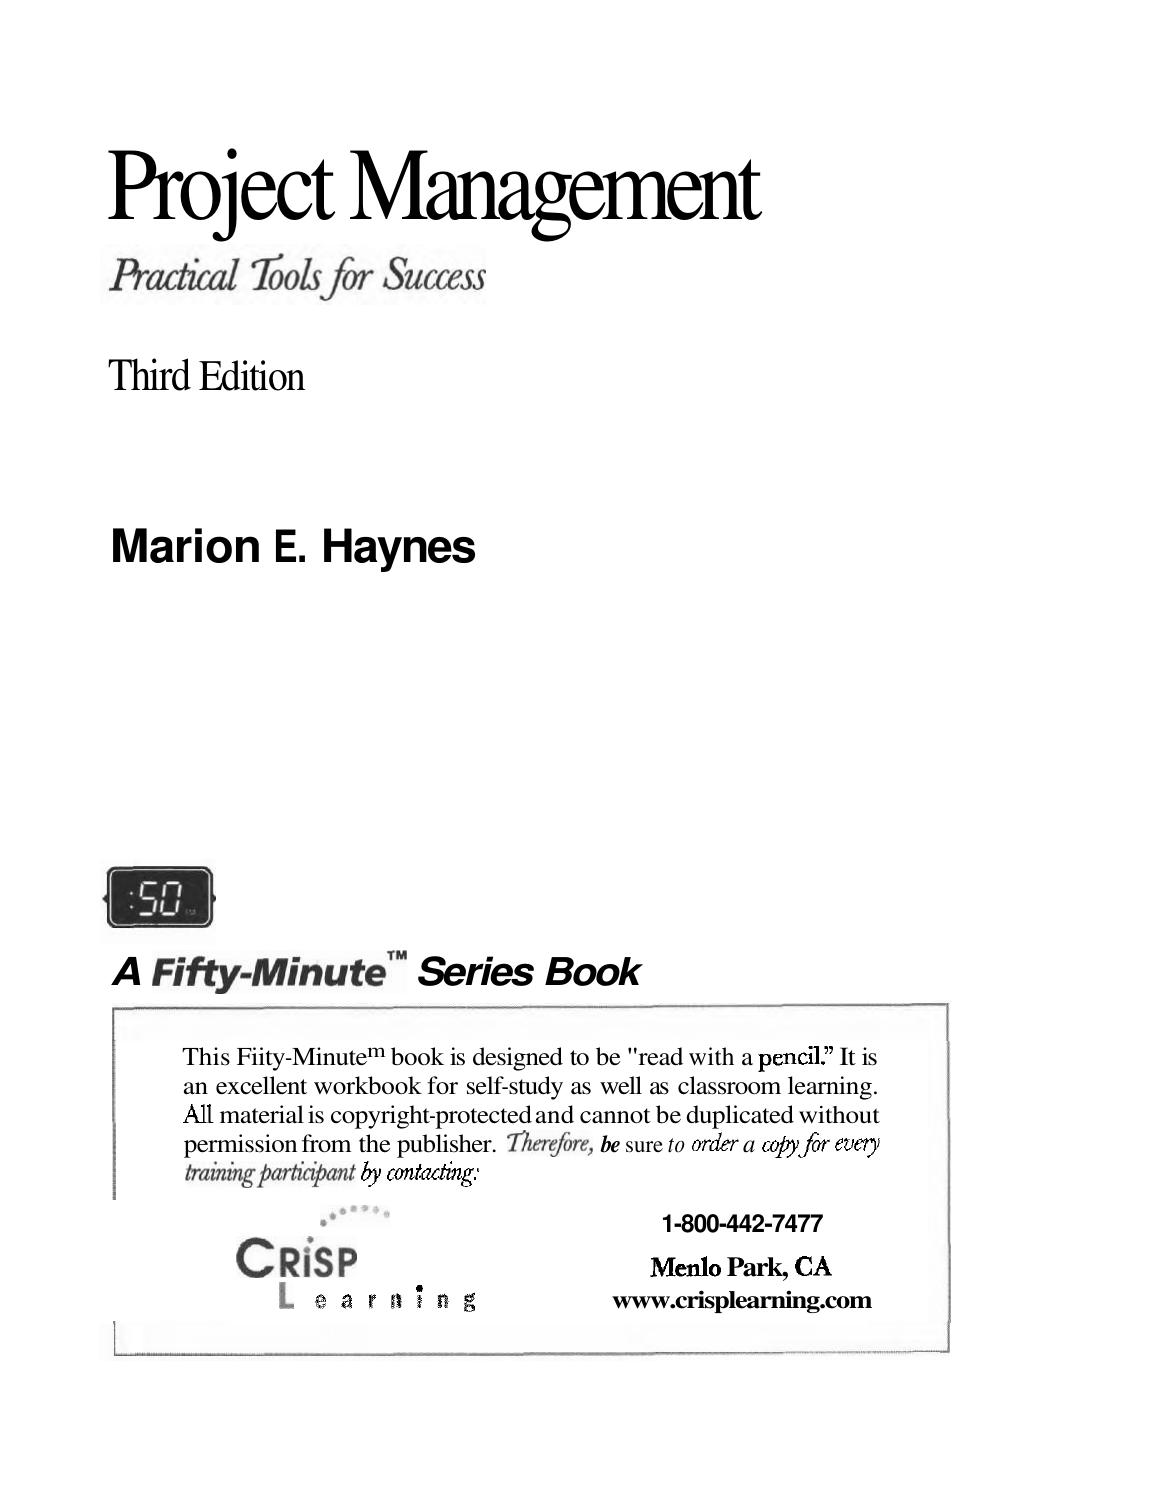 Project Management Practical Guide for Success. 2002